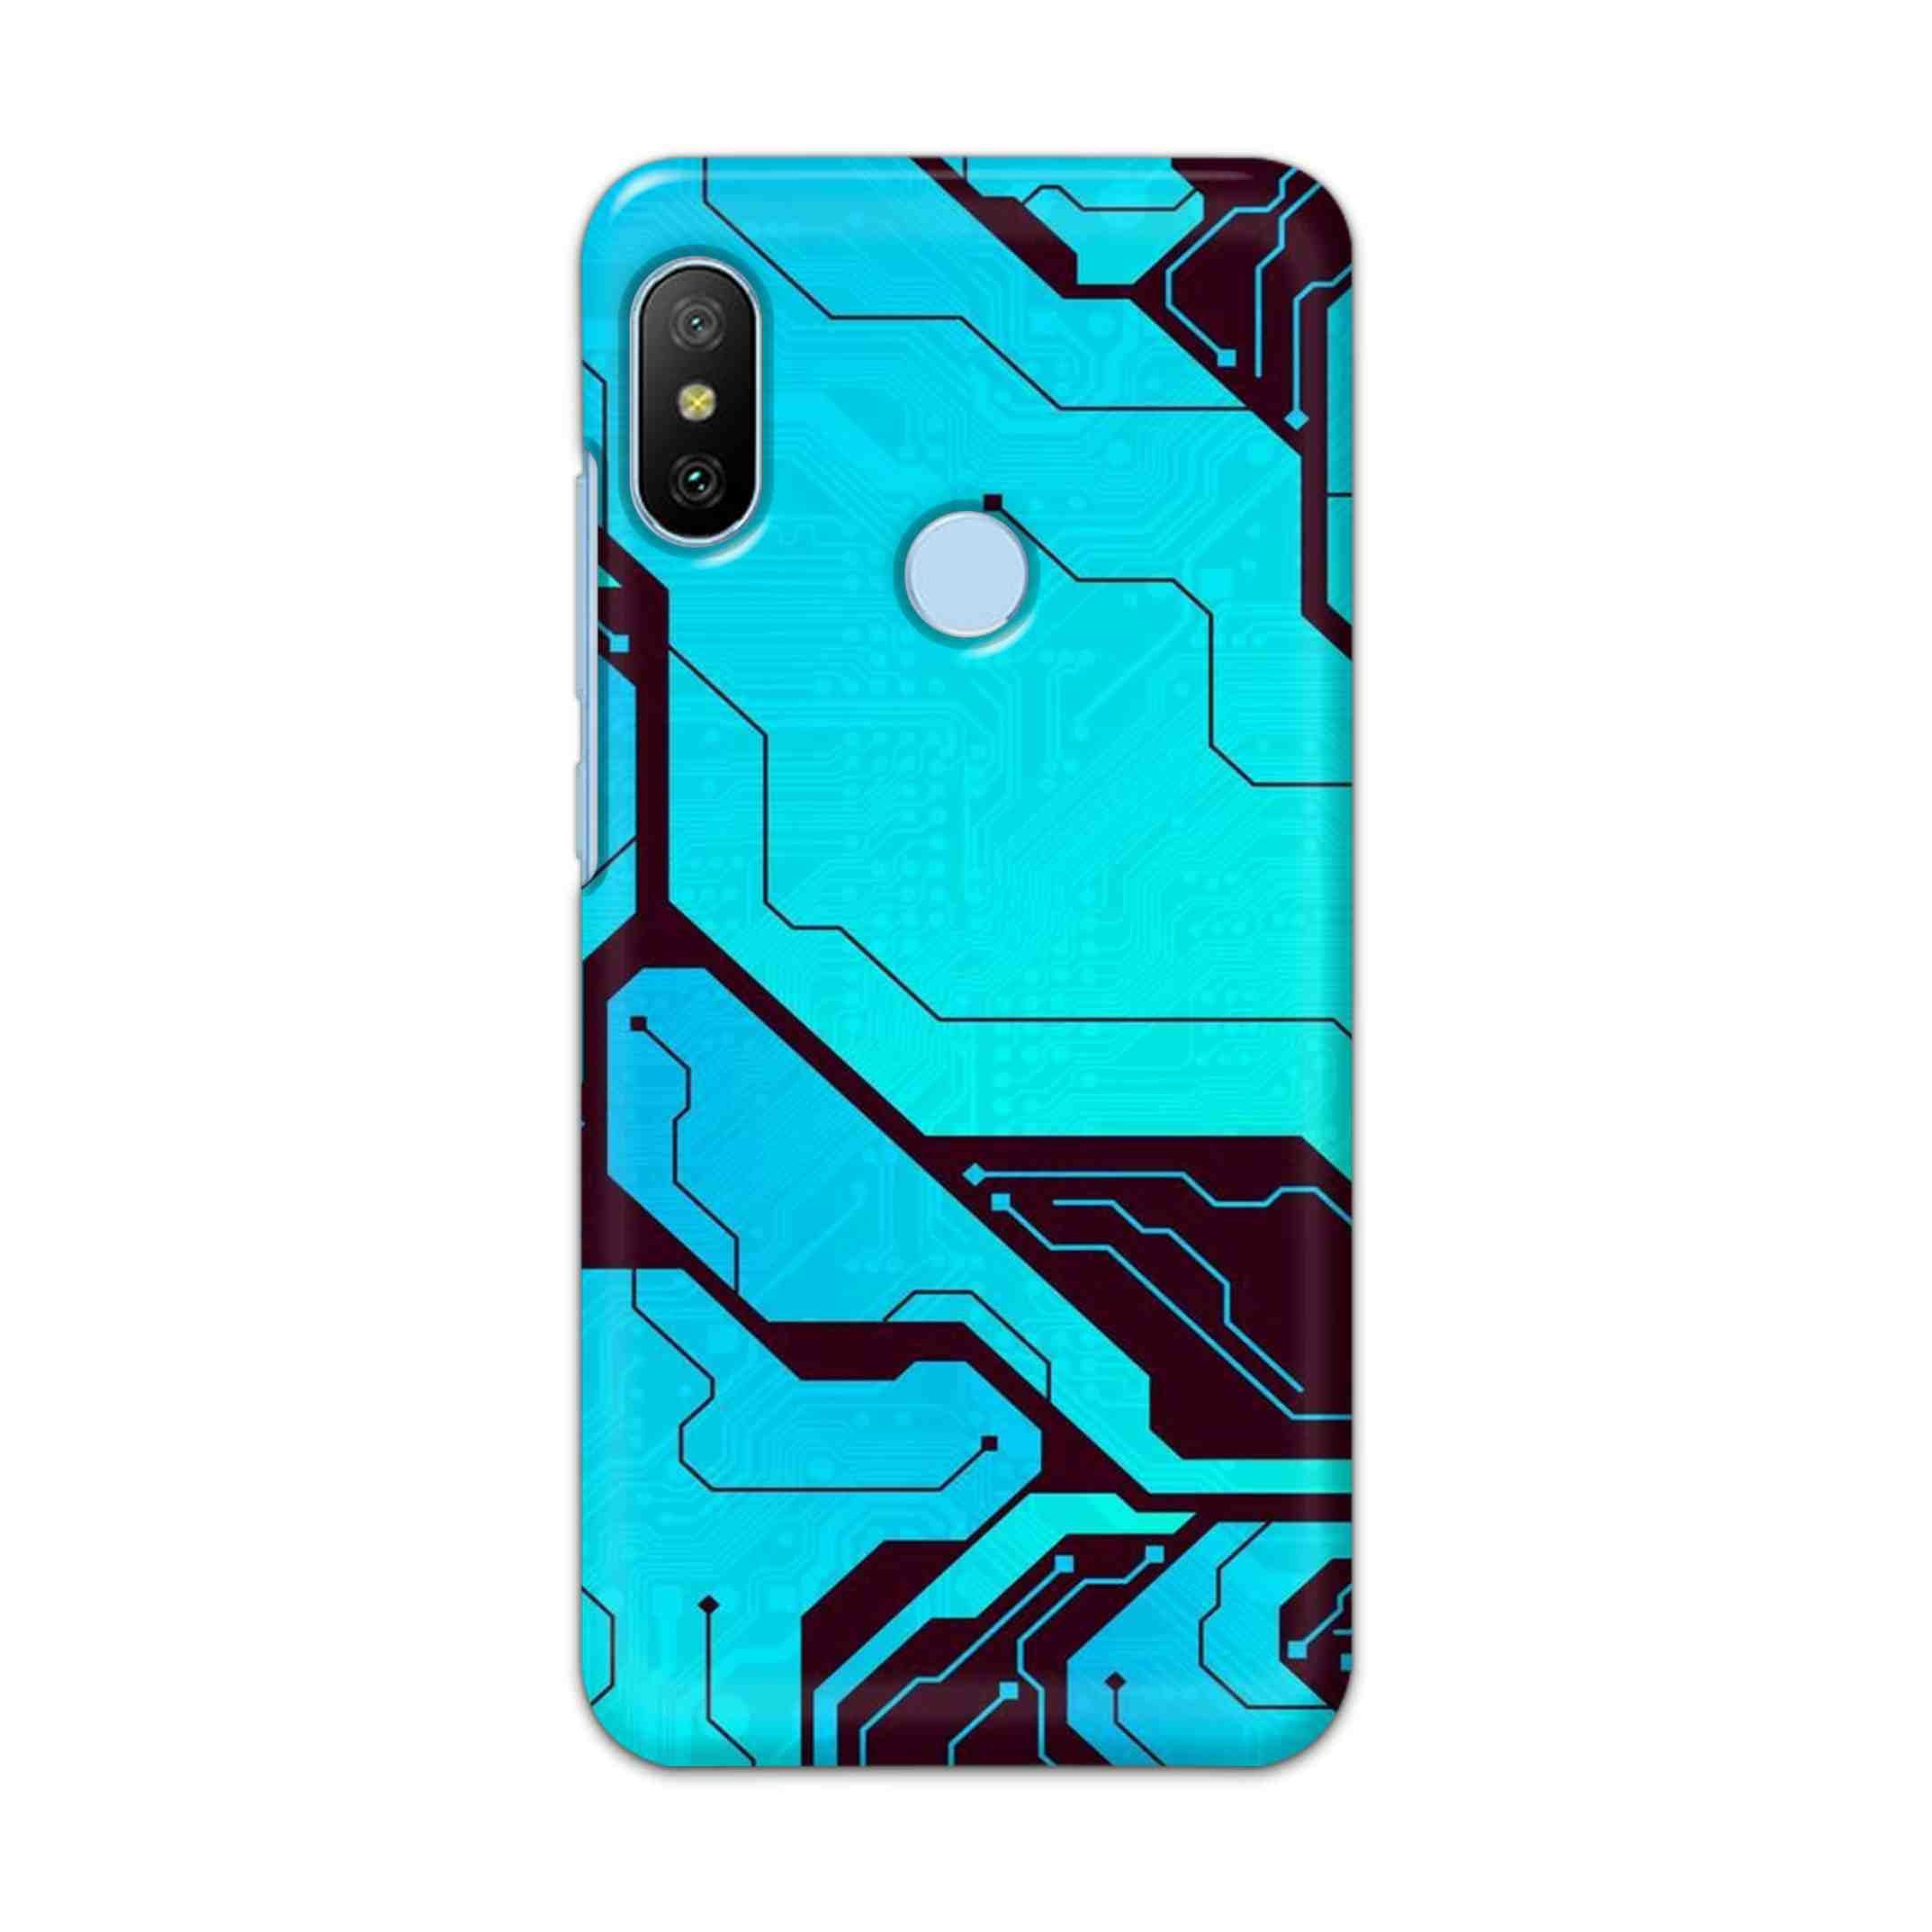 Buy Futuristic Line Hard Back Mobile Phone Case/Cover For Xiaomi A2 / 6X Online